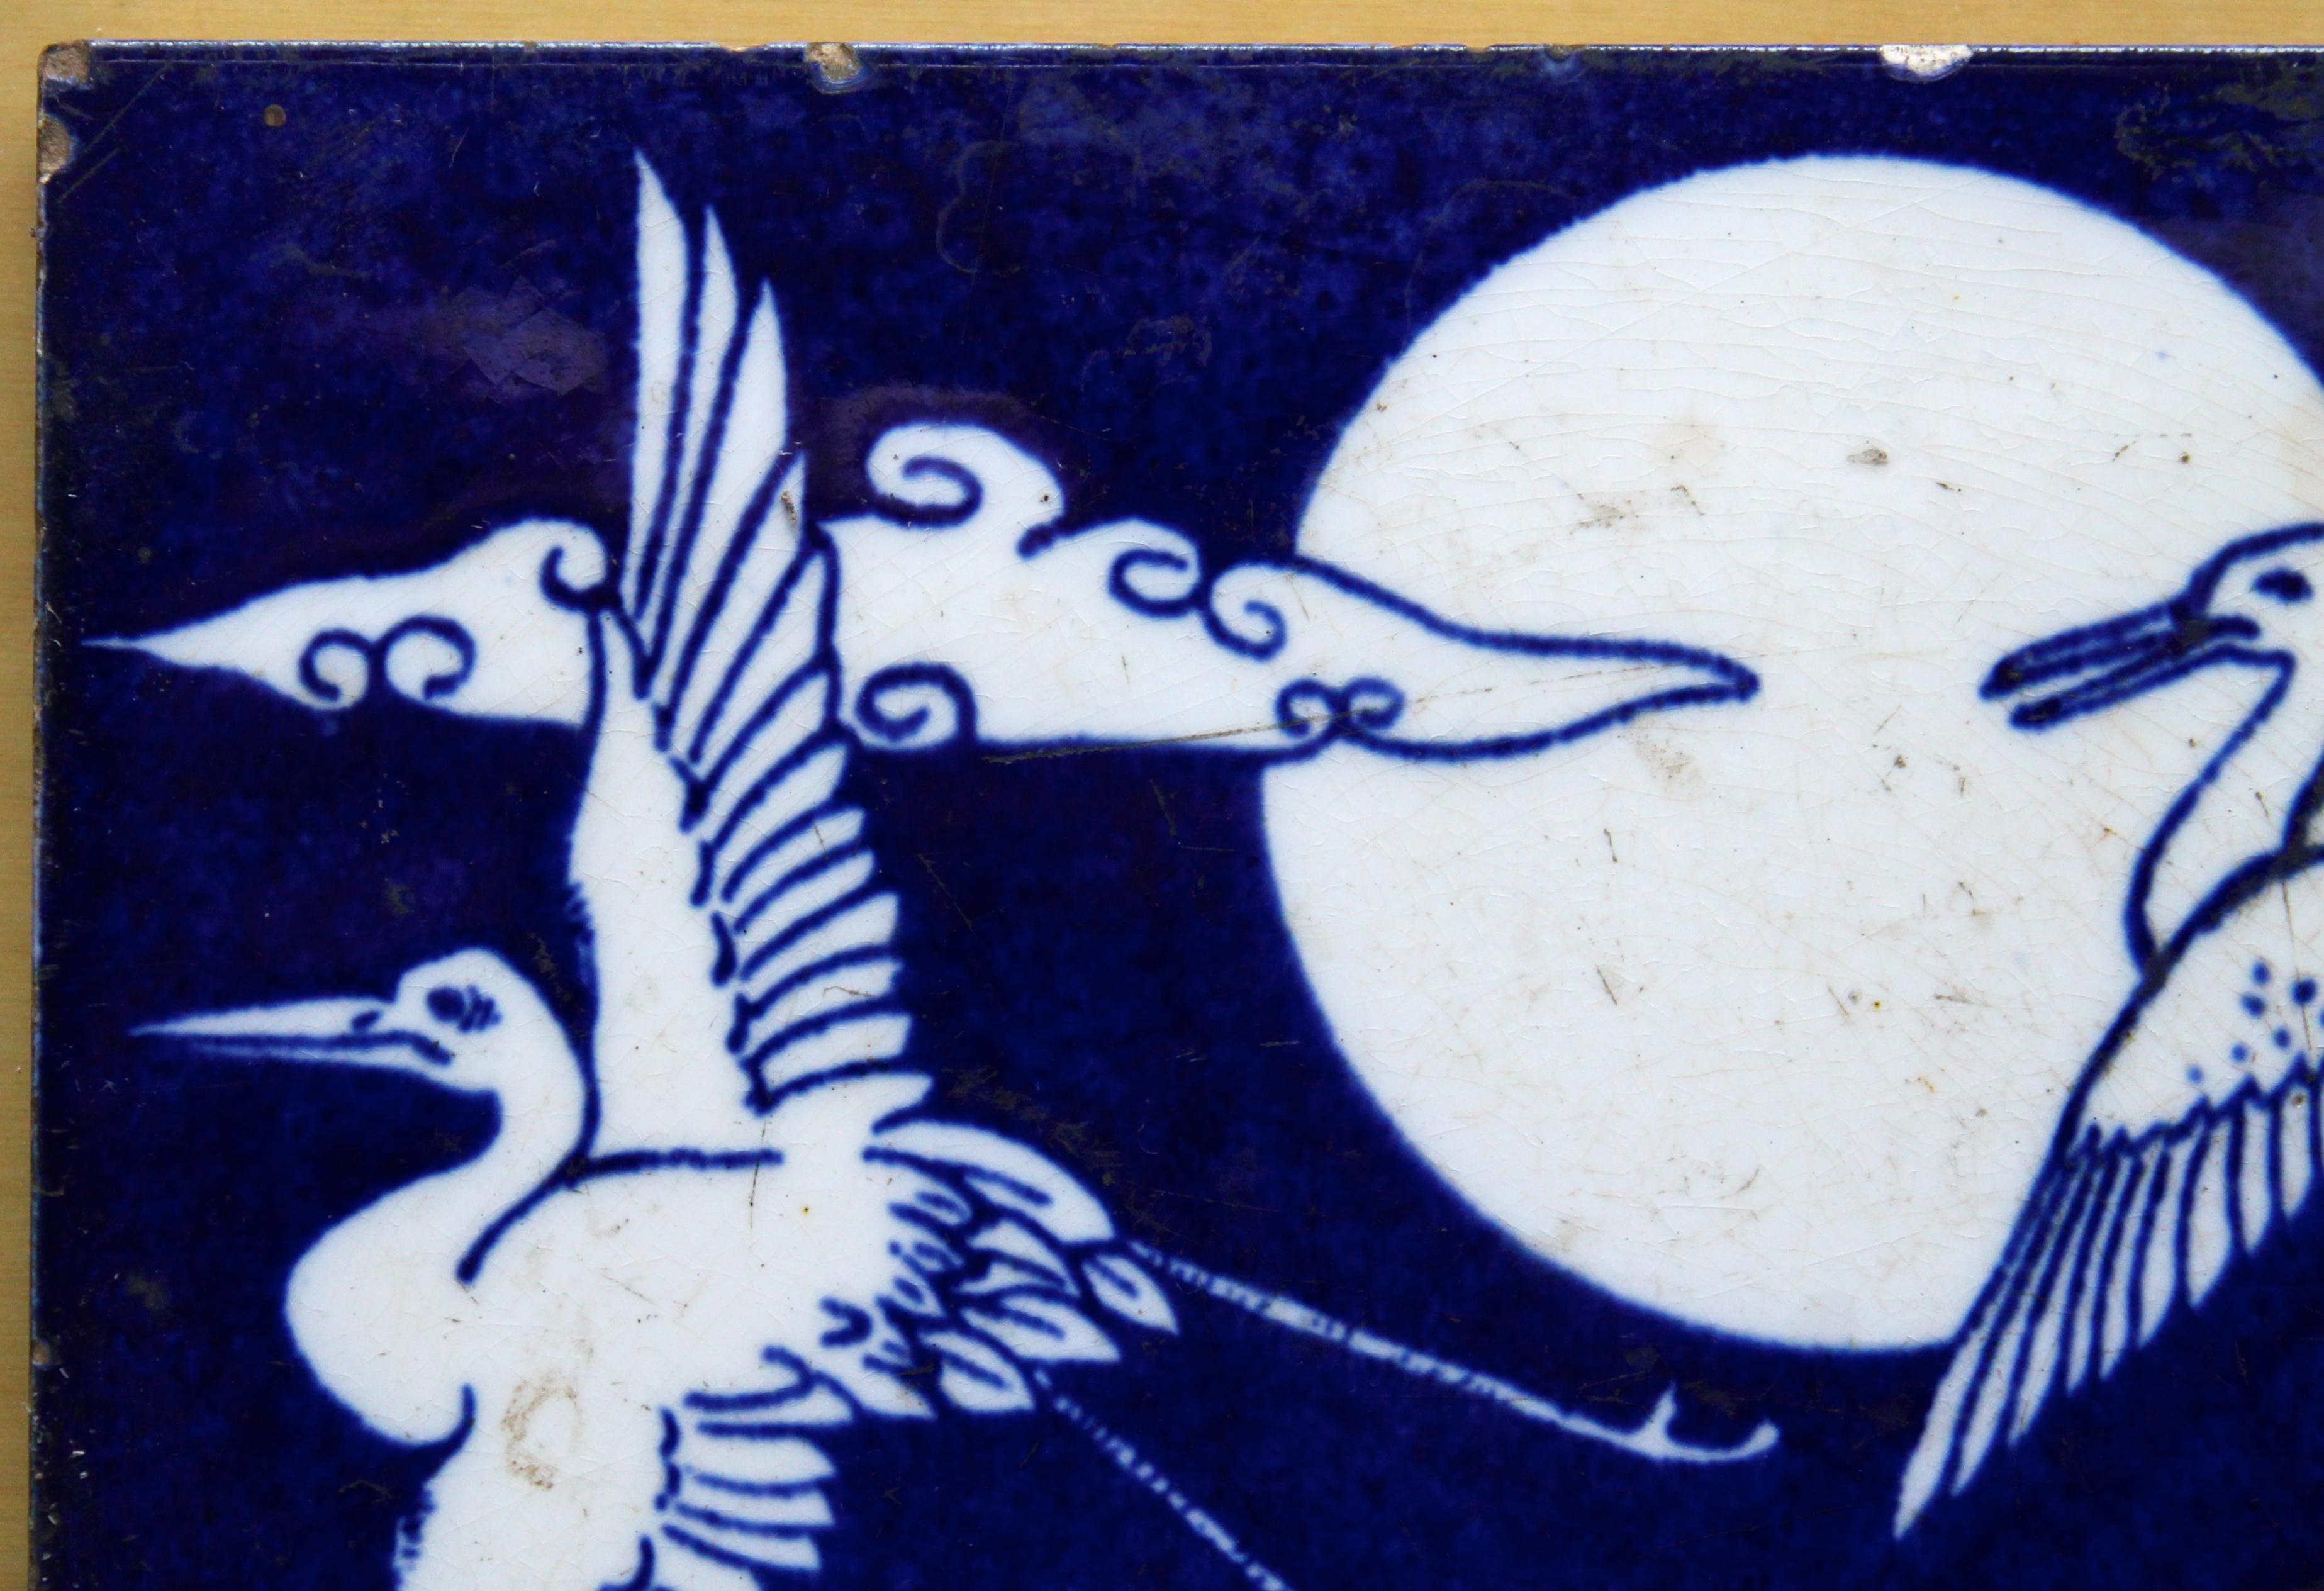 While none of the pieces made by Minton bear Dressers signature, this tile can be firmly identified as his design based on drawings in the company archives. (as stated in The Metropolitan Museum of Arts' description with their copy of this tile).